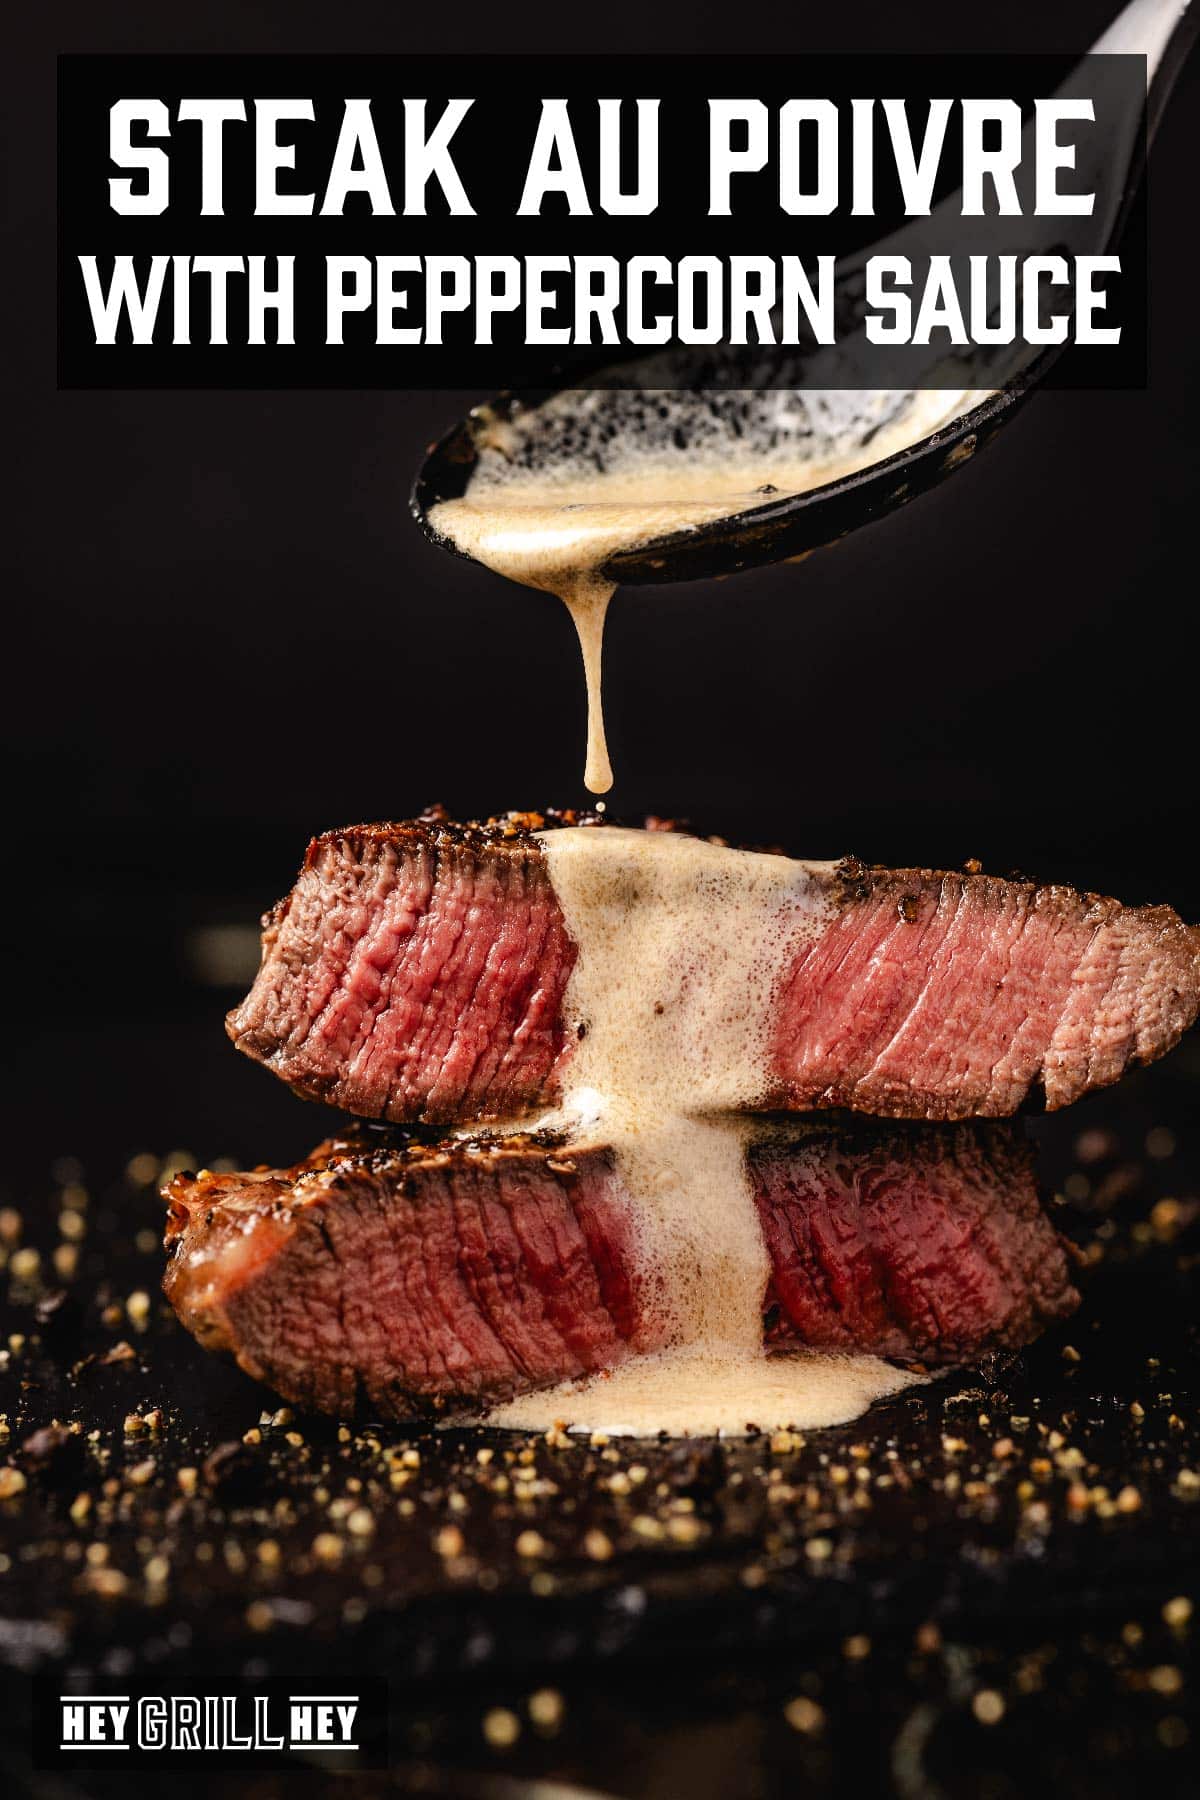 Sliced steak being drizzled with sauce from spoon. Text reads "Steak au Poivre with Peppercorn Sauce".